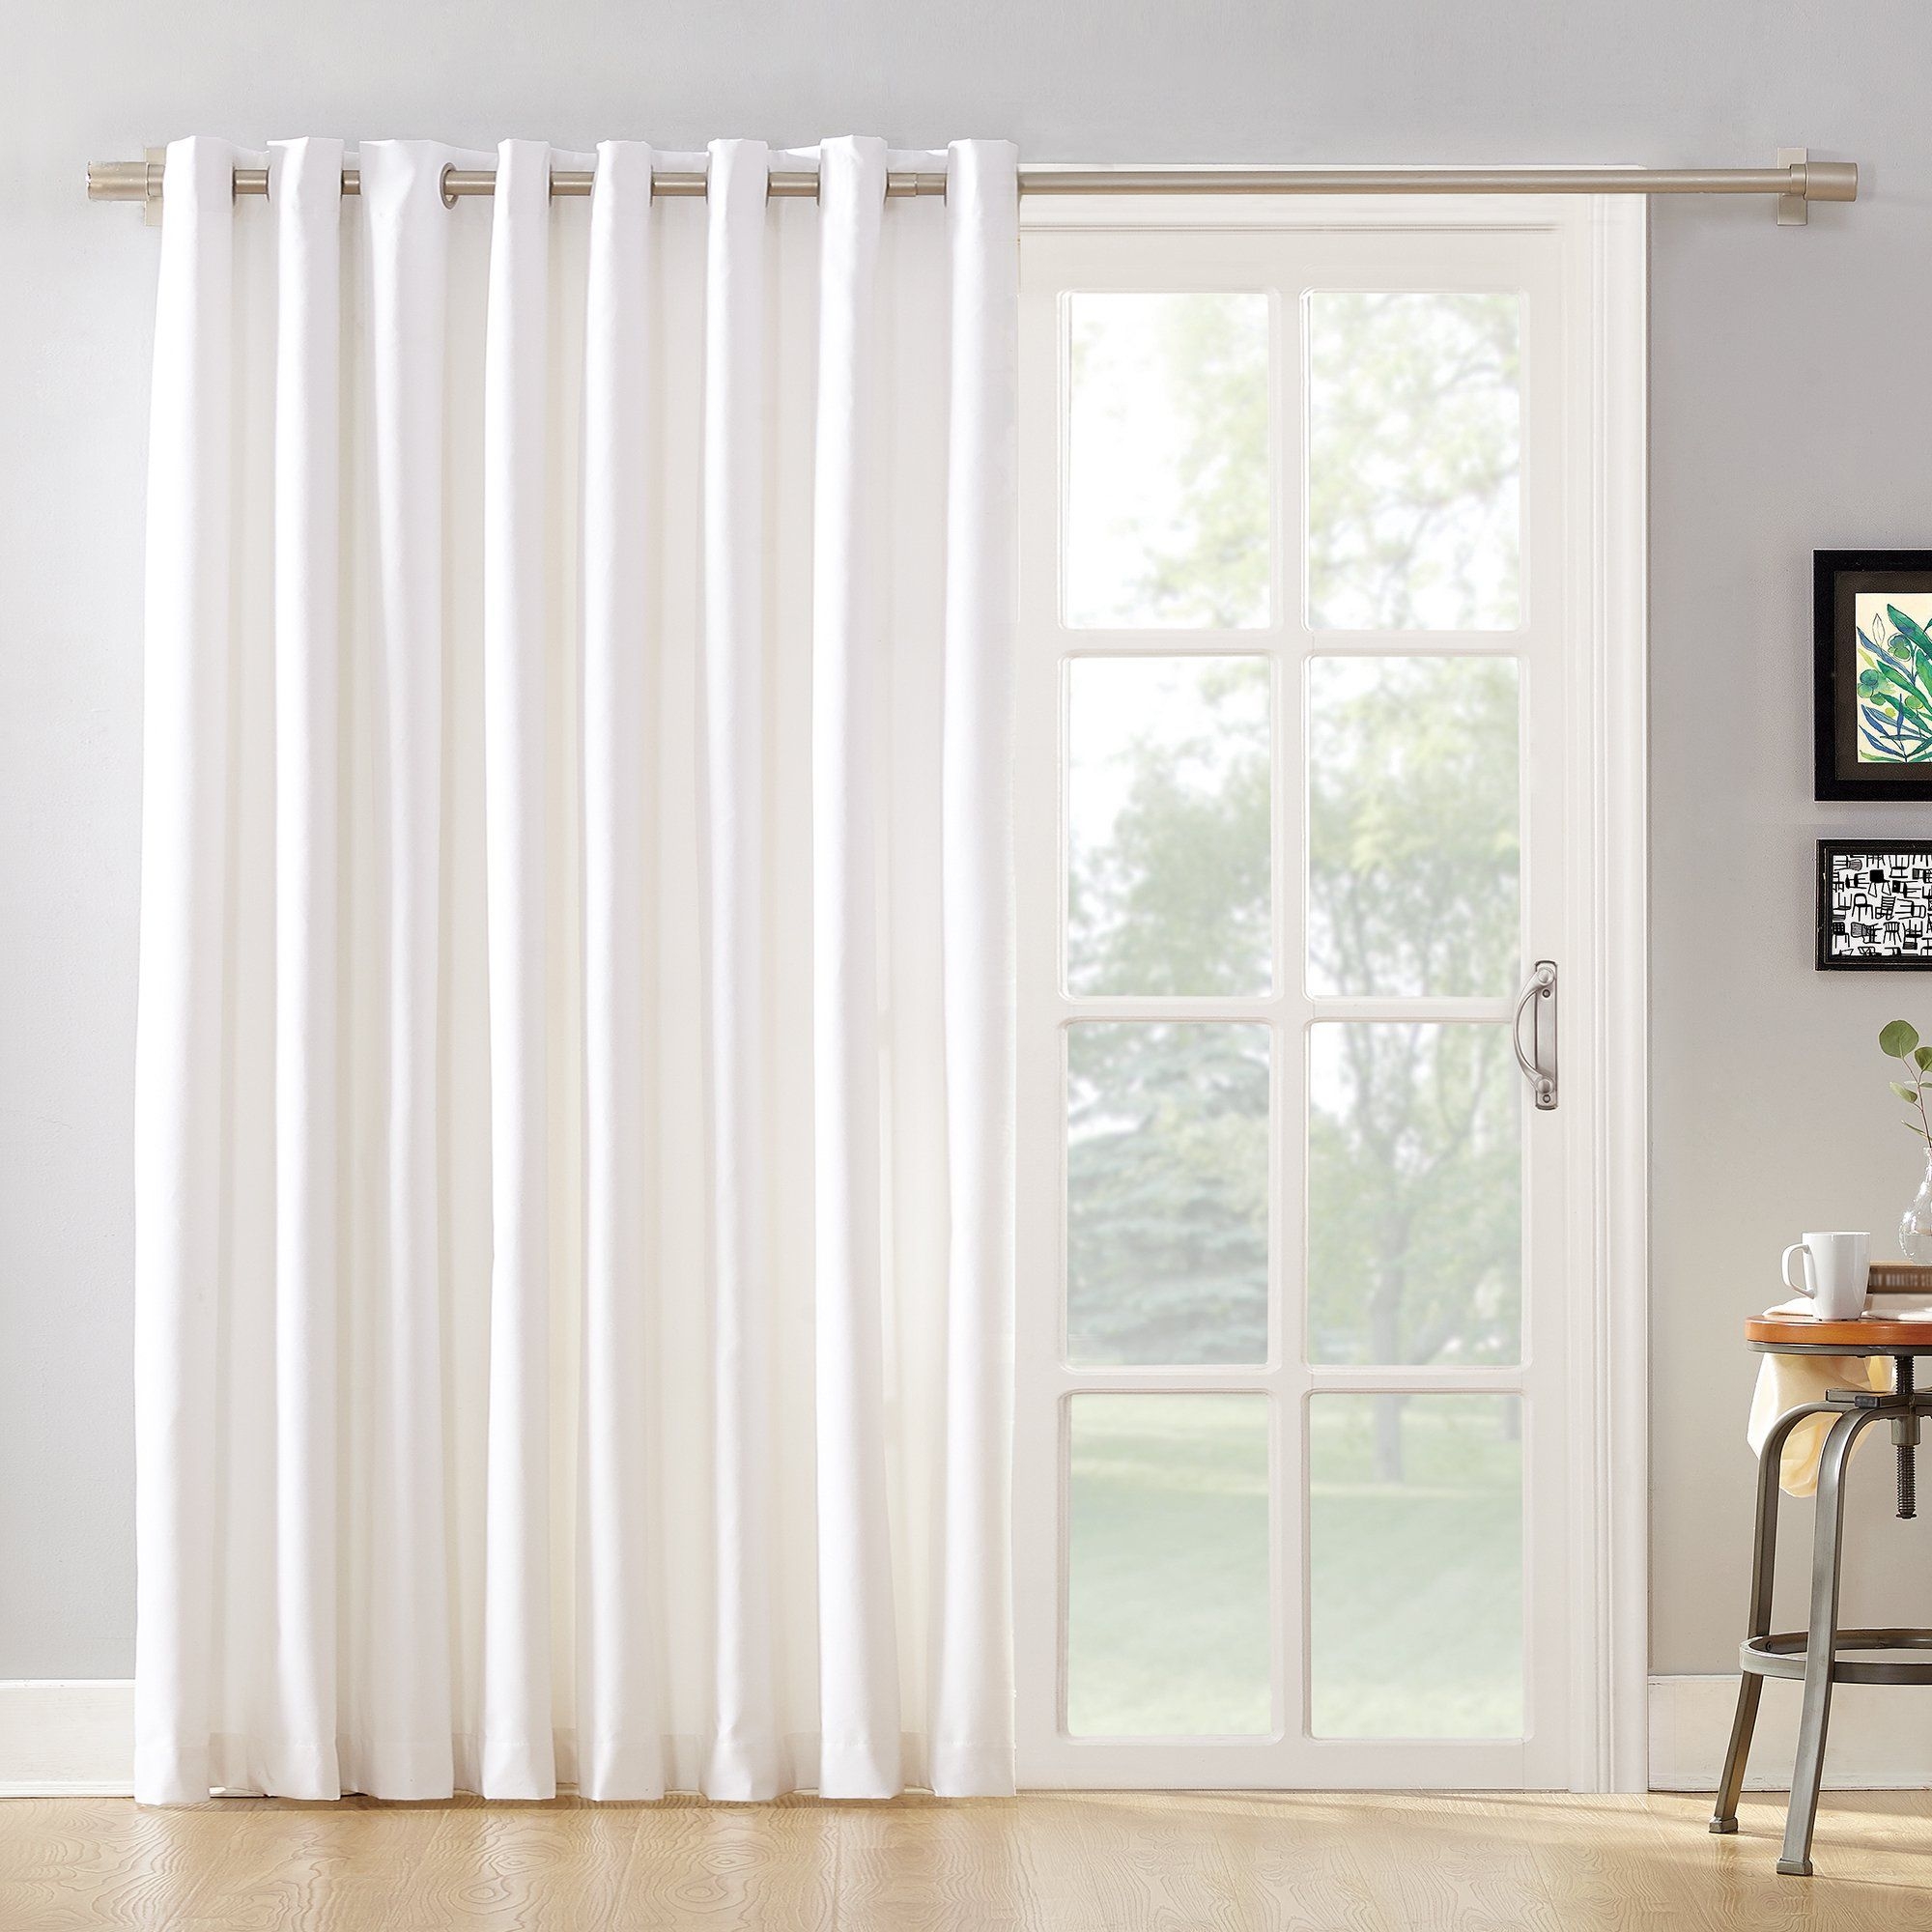 Curtains For Patio Doors Visualhunt, Patio Door Curtains Or Shades